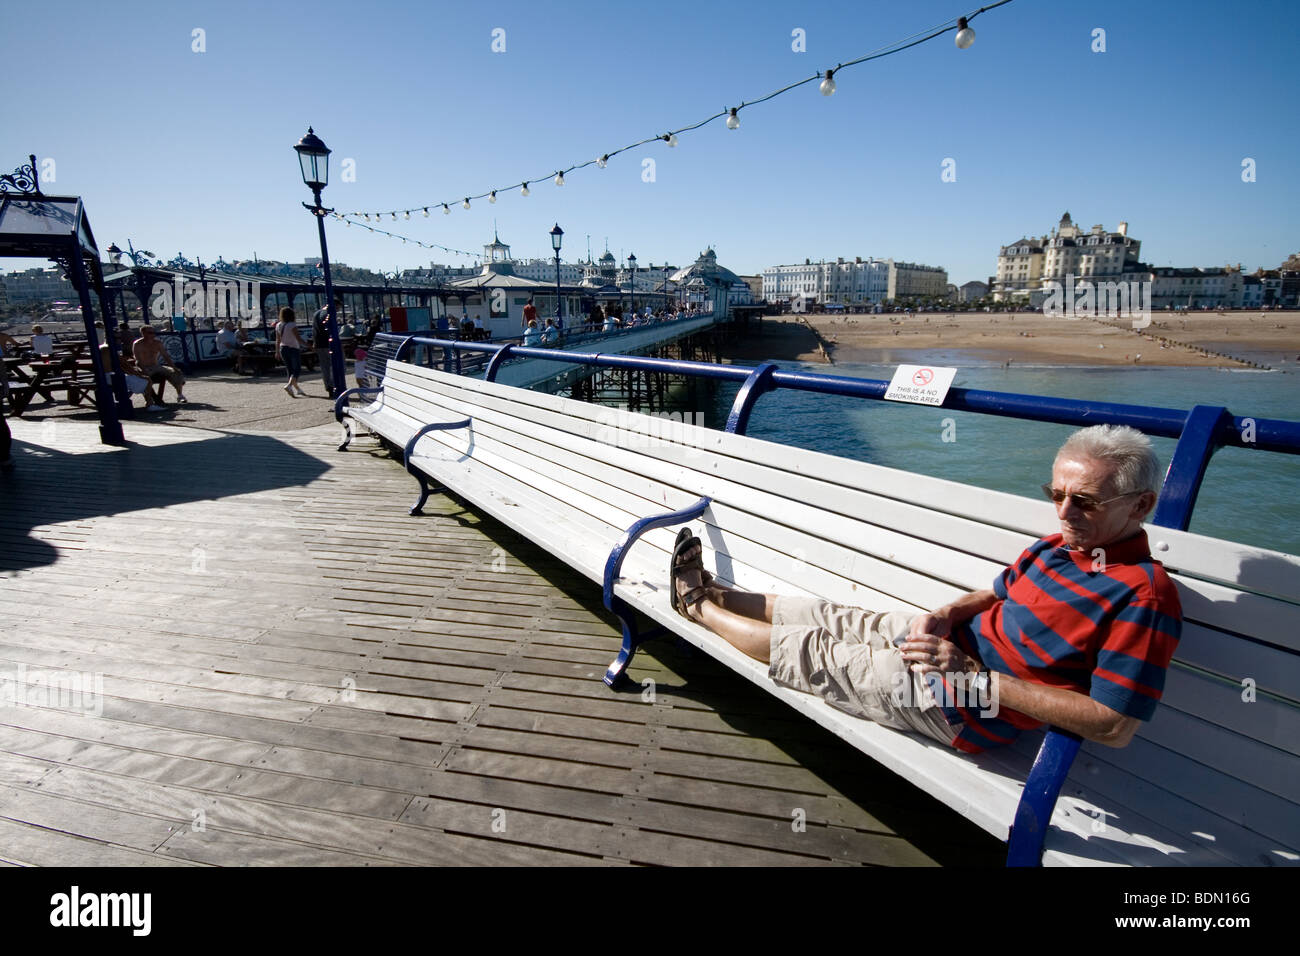 Relaxing on the pier at Eastbourne, England. Stock Photo